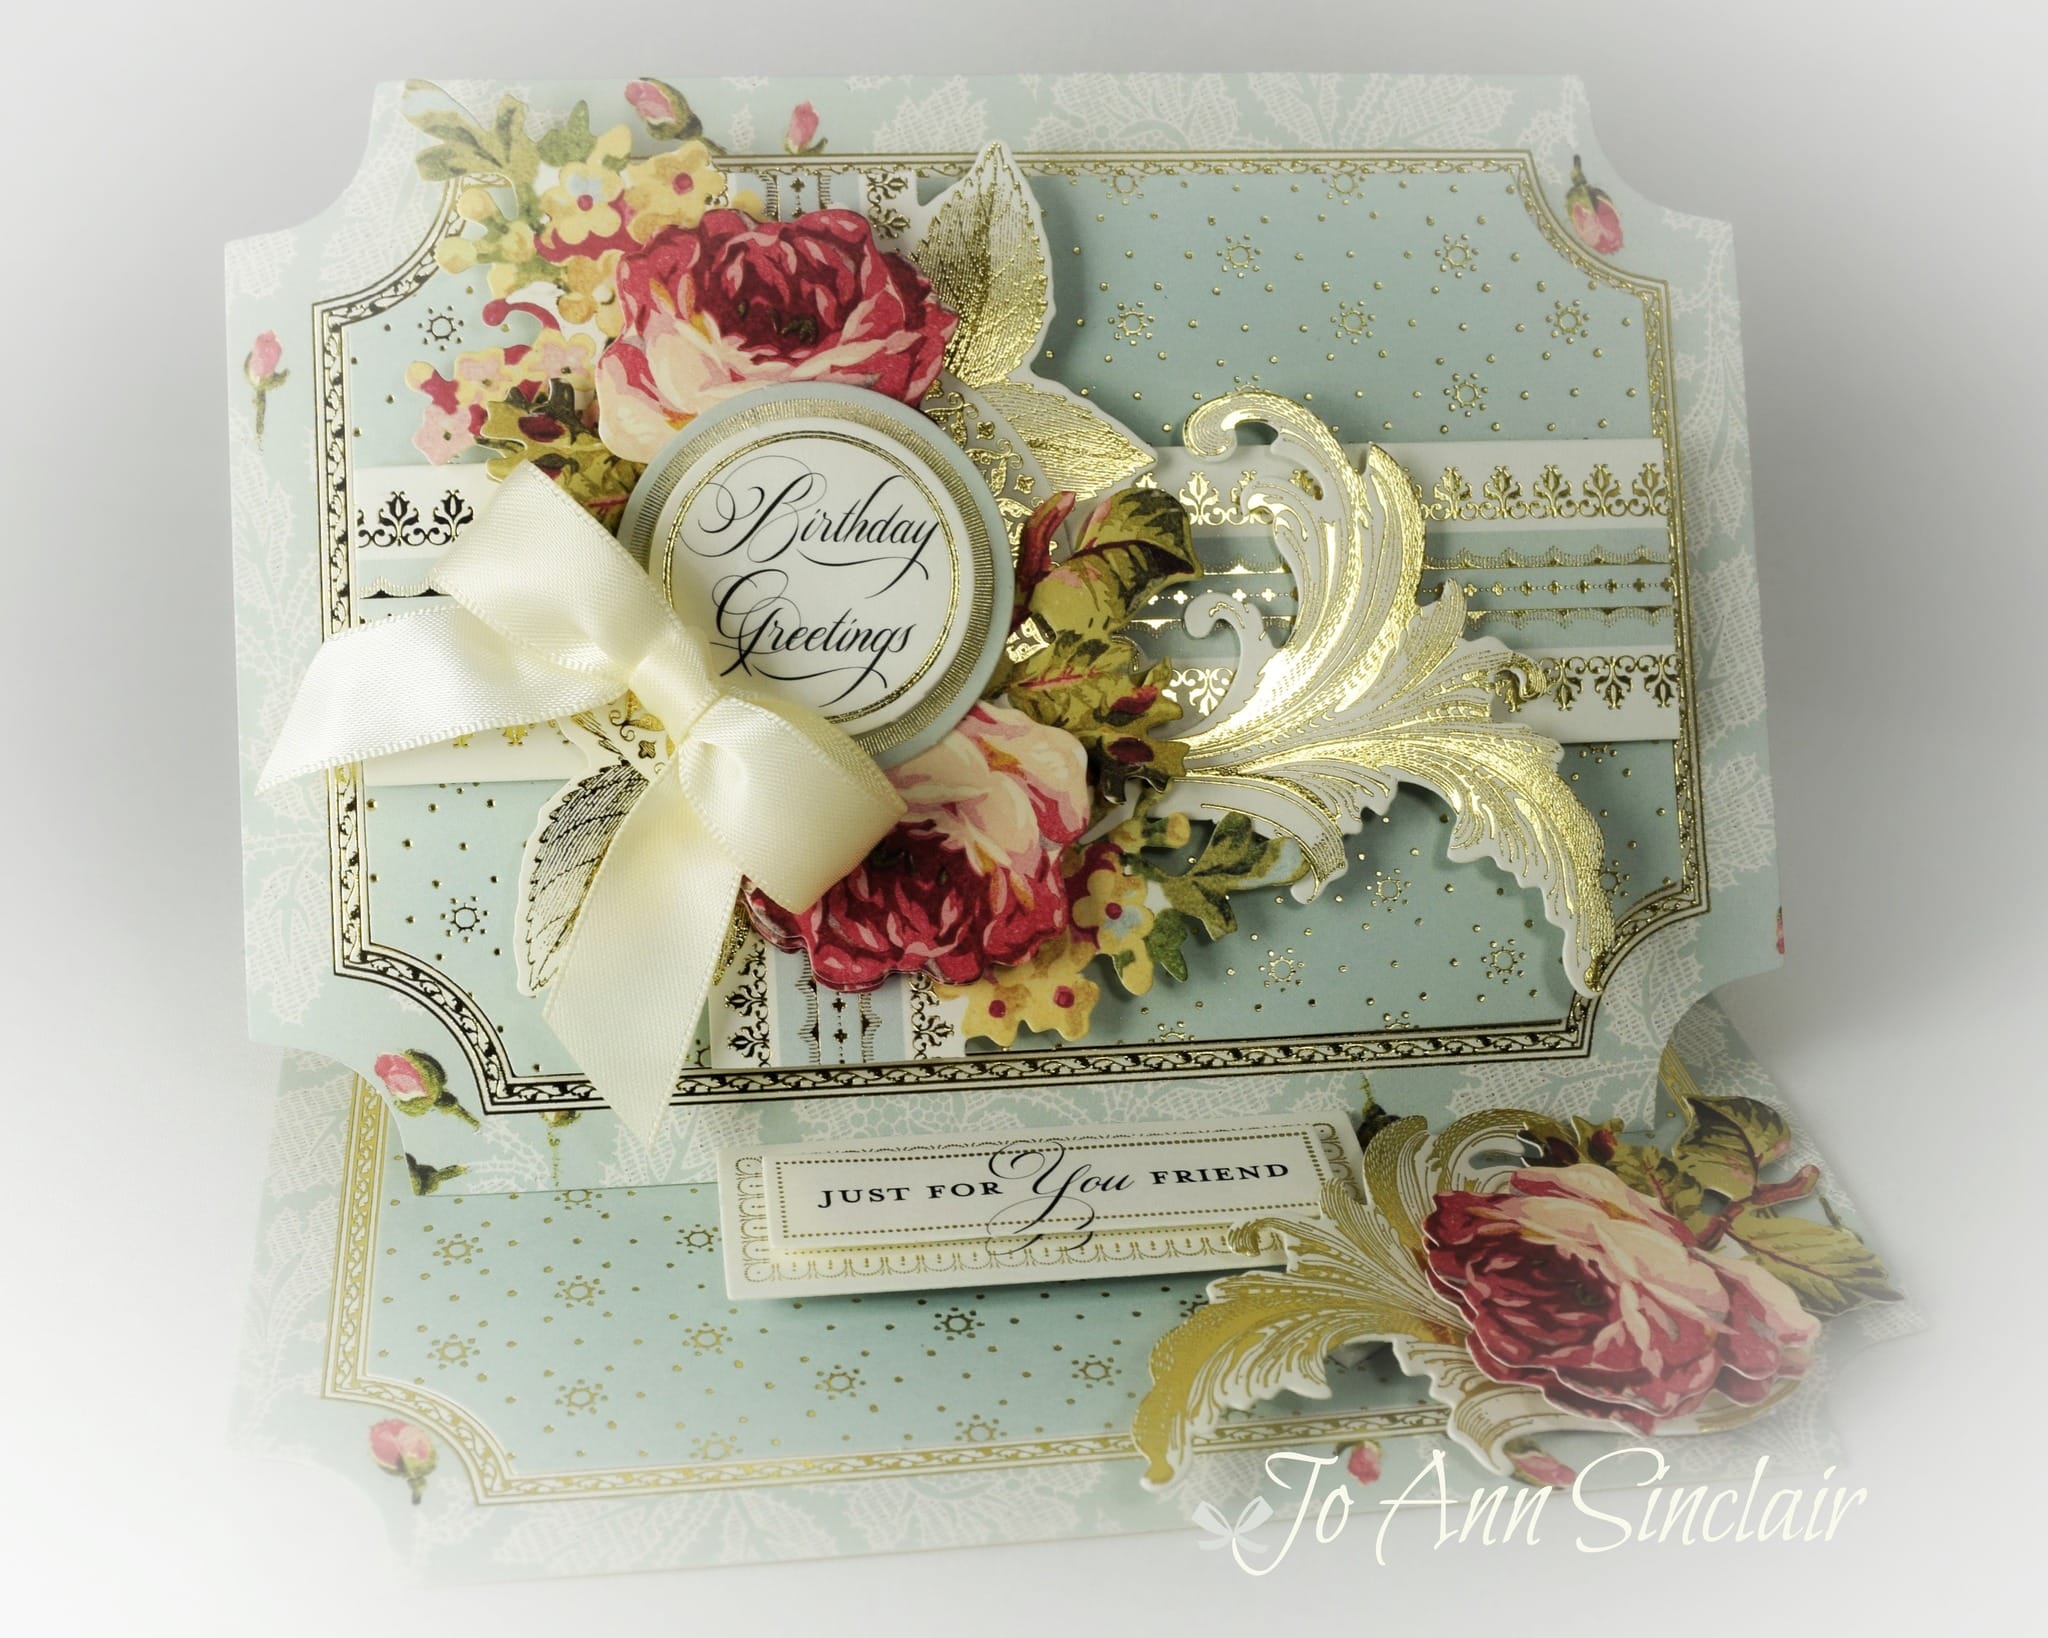 A card with roses and a bow on it.